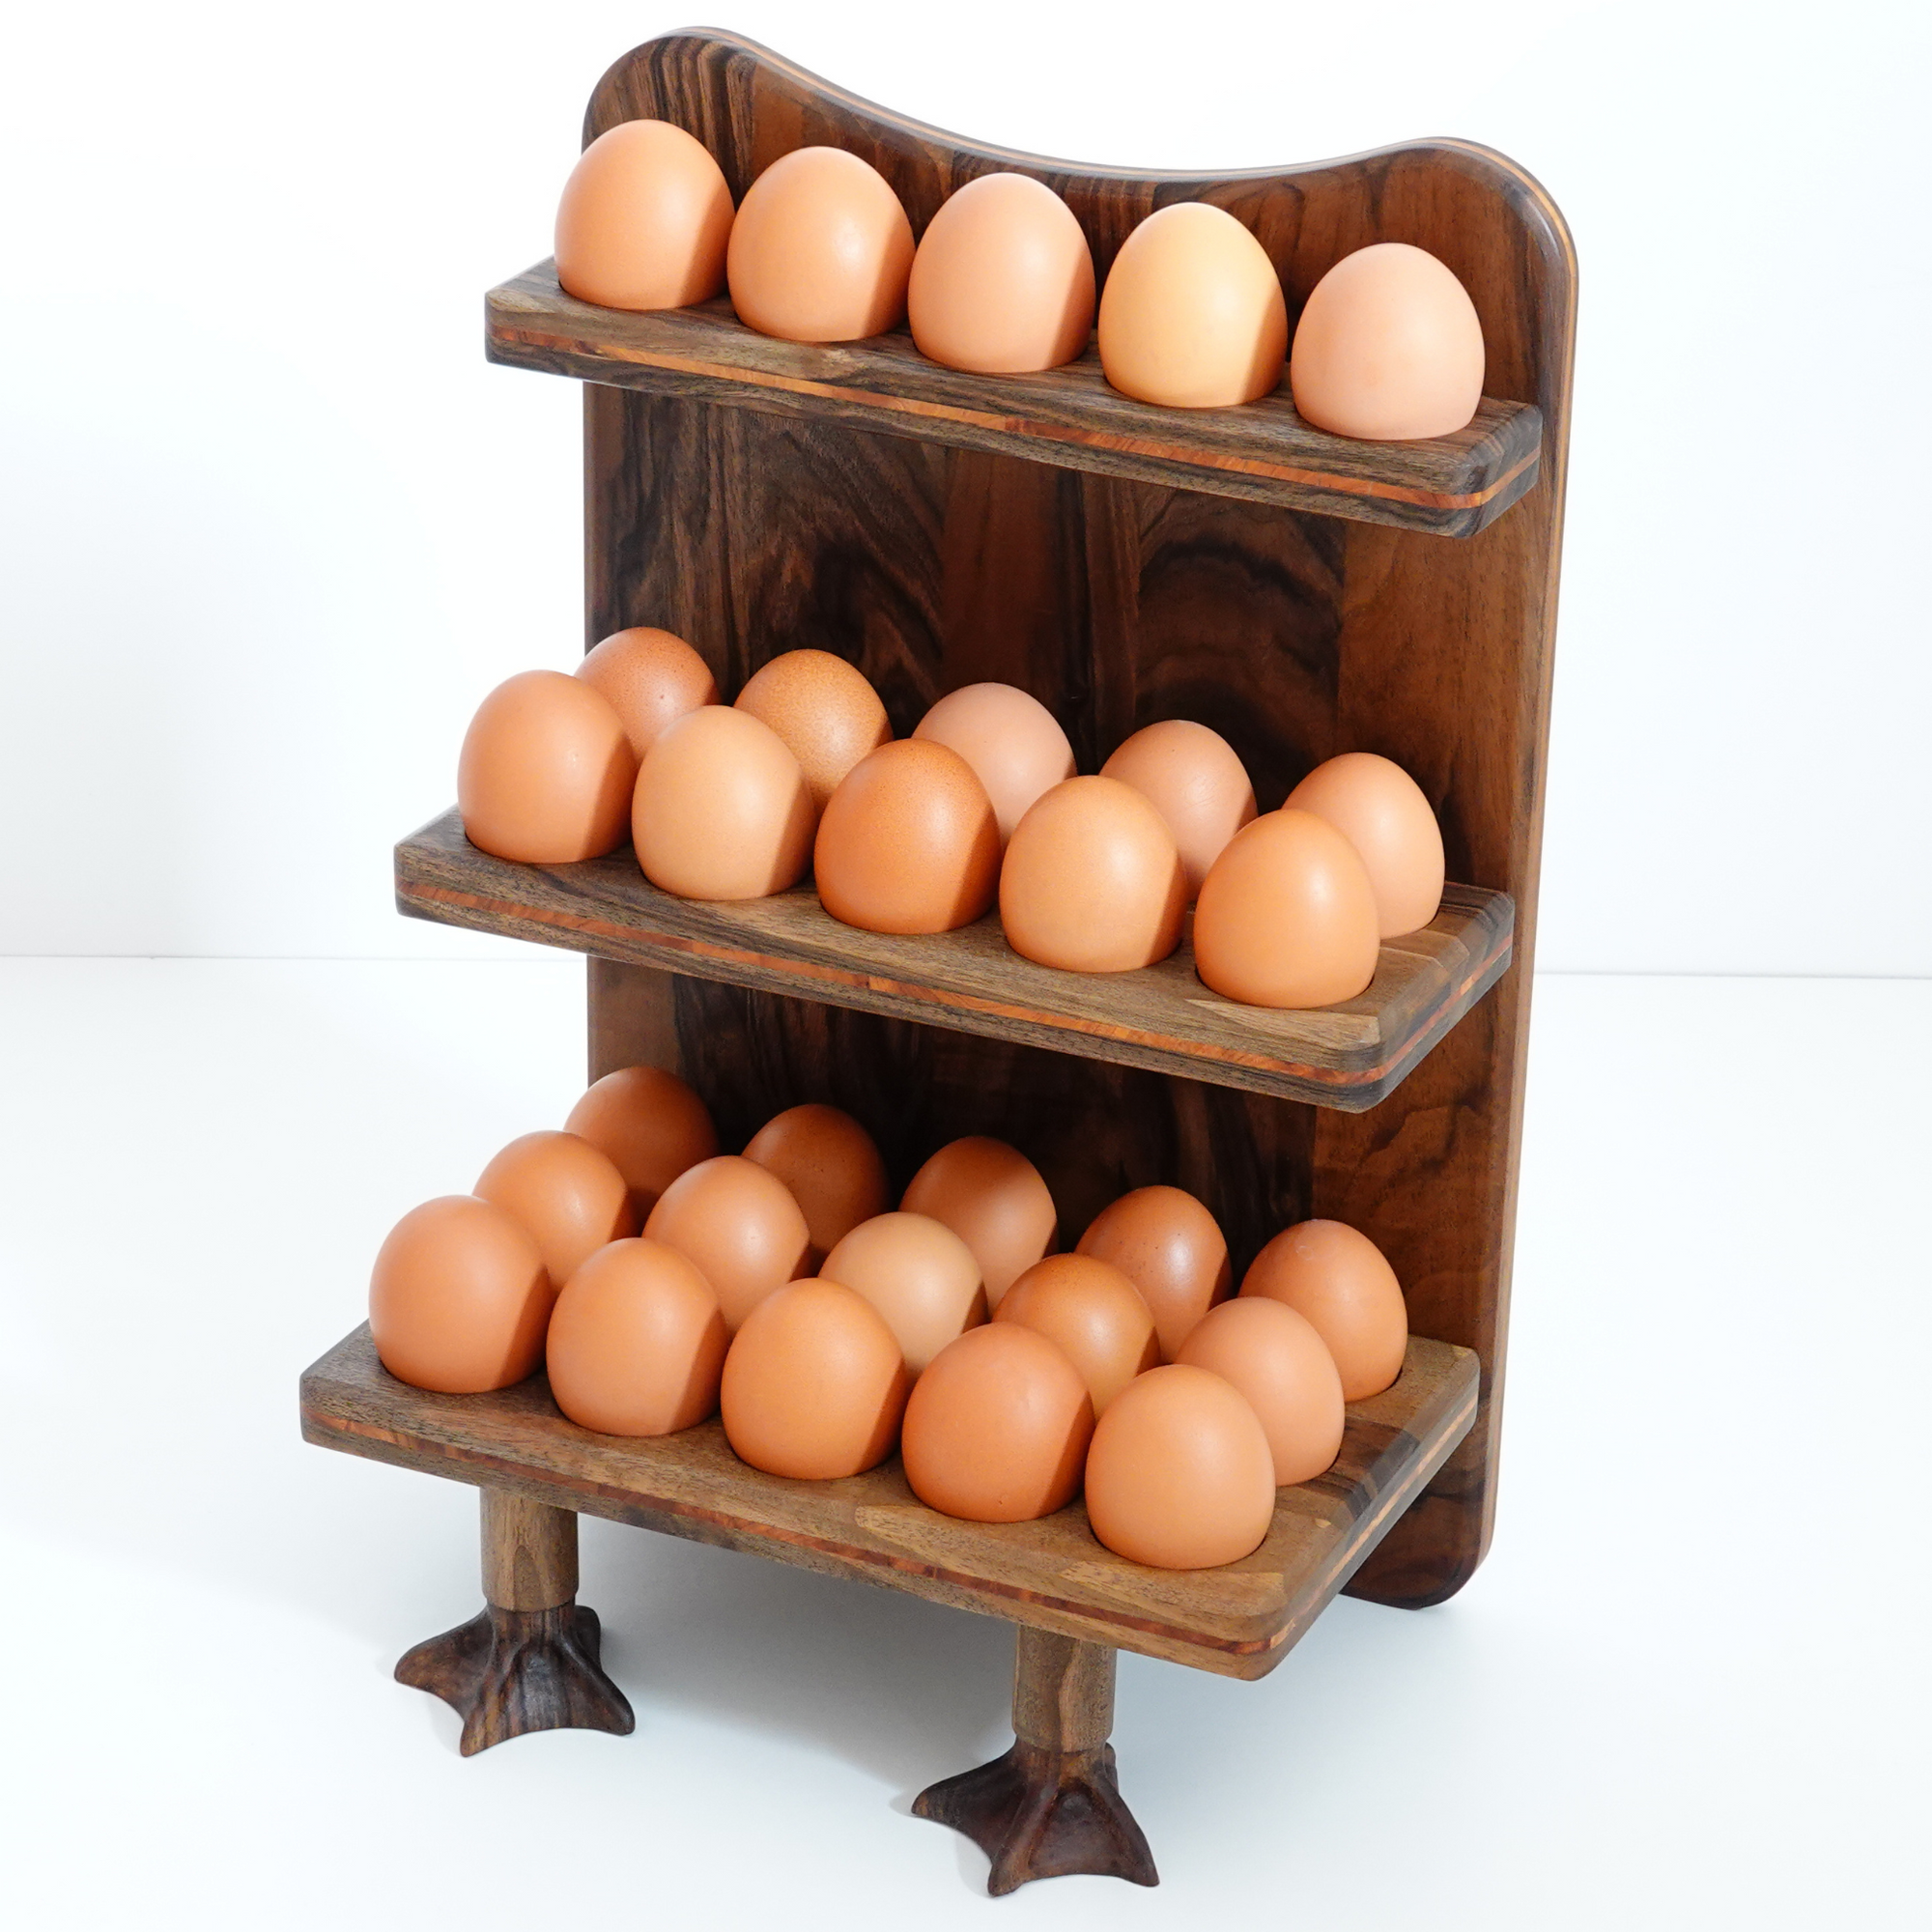  Antiy Wooden Easter Egg Holder, Happy Easter Themed Wooden  Easter Bunny Egg Holder DIY Egg Rack Holder 8 Holes Eggs Display Stand  Easter Home Kitchen Decorations : Home & Kitchen